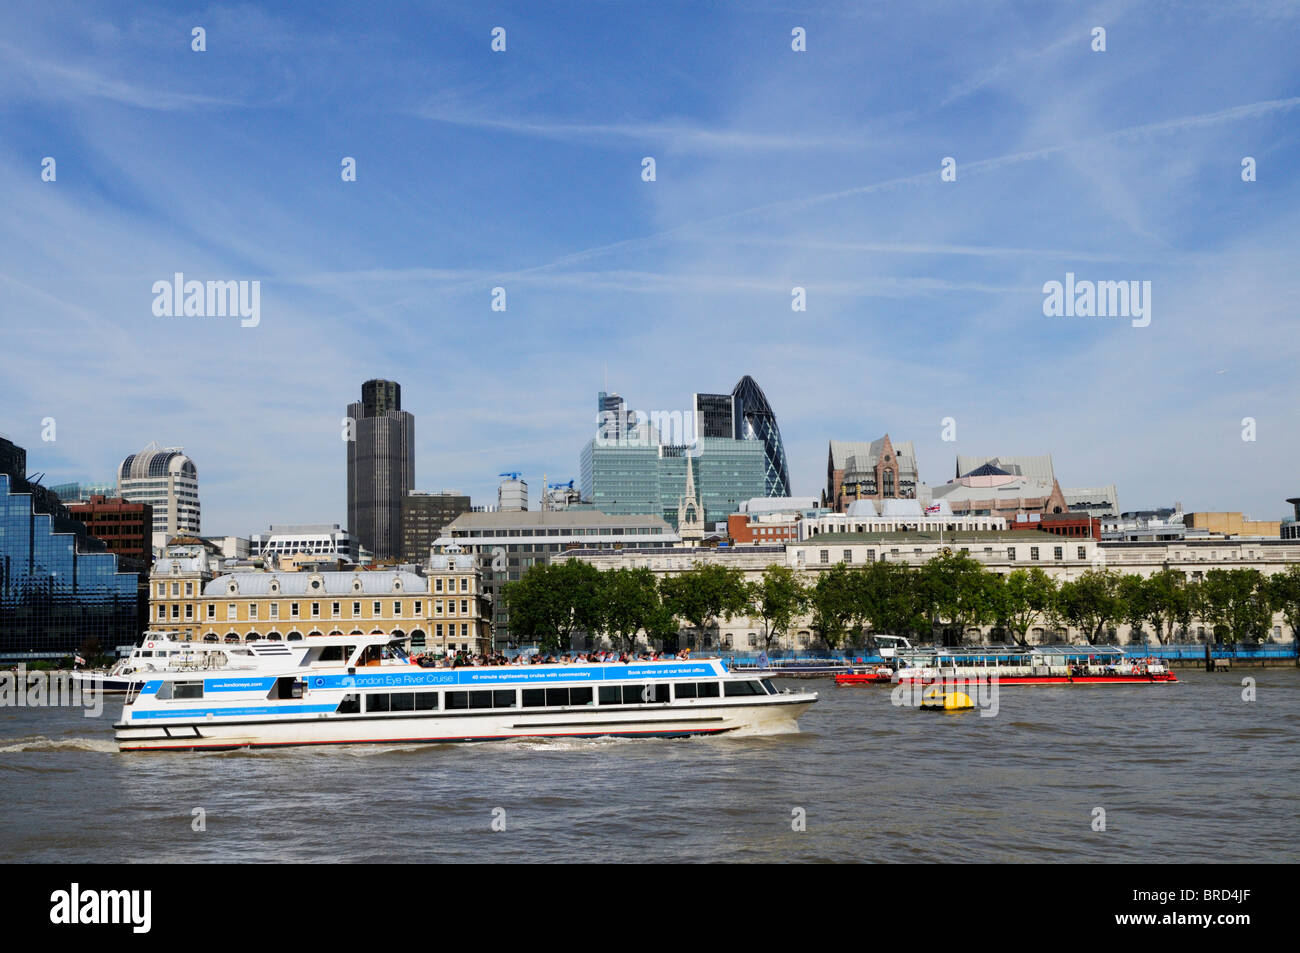 Tourist Sightseeing cruise boats on the River Thames, with City of London buildings in the background, London, England, UK Stock Photo